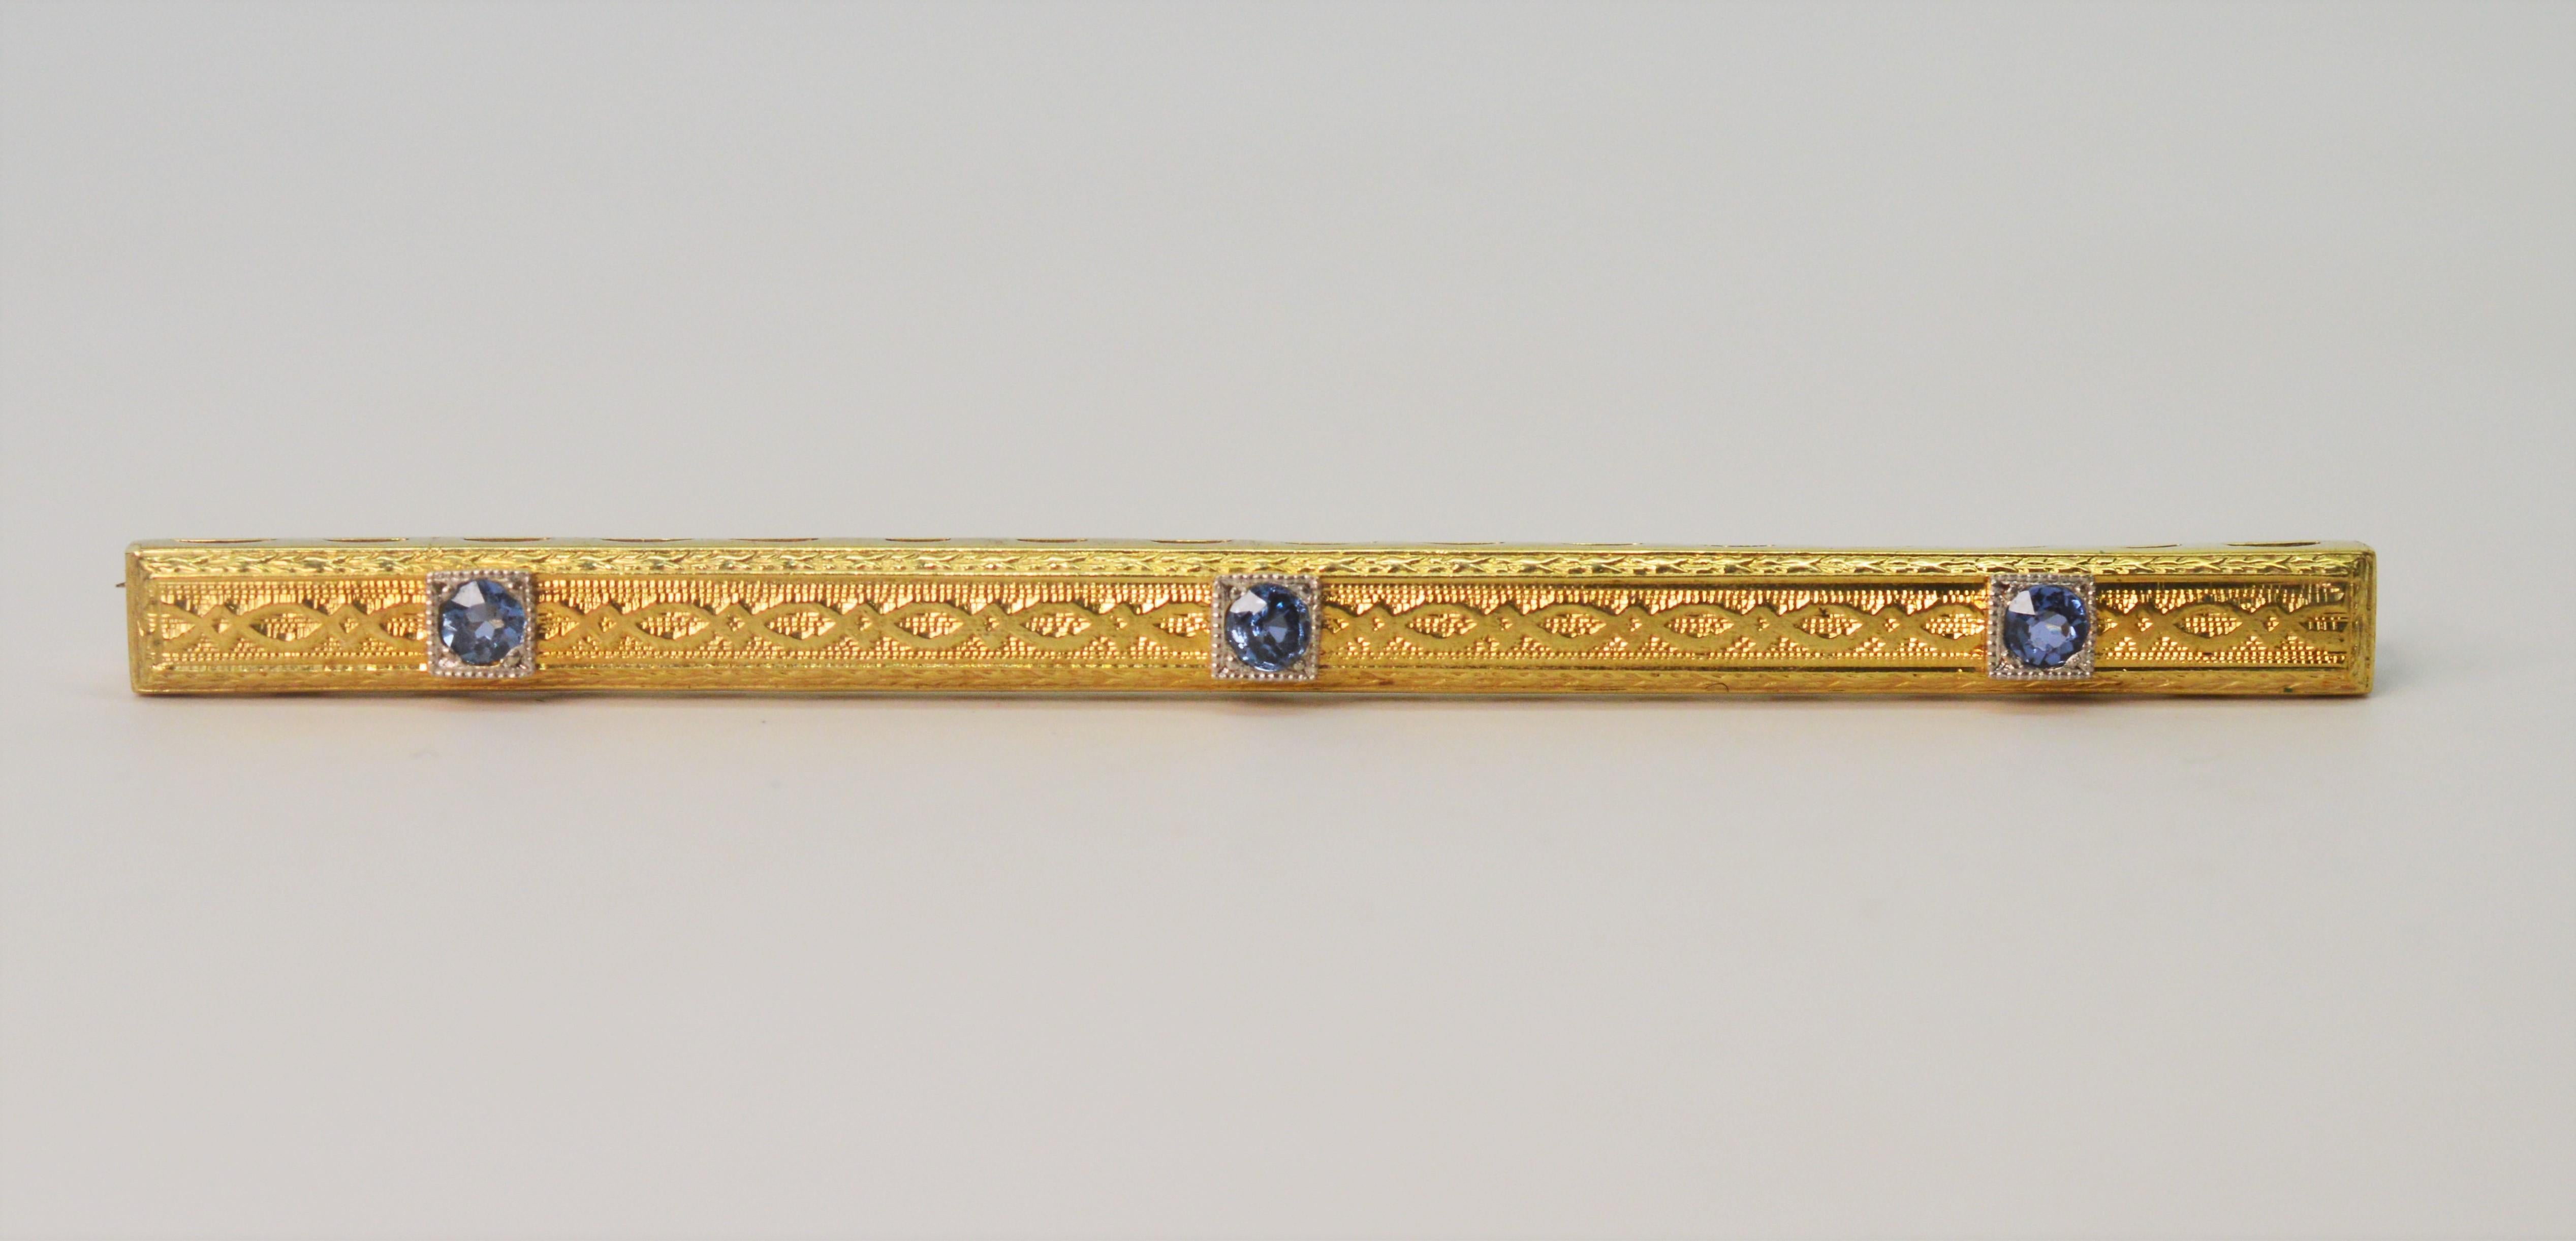 Three round-cut blue sapphires adorn this fancy fourteen carat yellow gold bar pin brooch. Measuring 2-1/2 inches in length, this bar pin brooch has a meandering decorative design that gives it dimension.
  